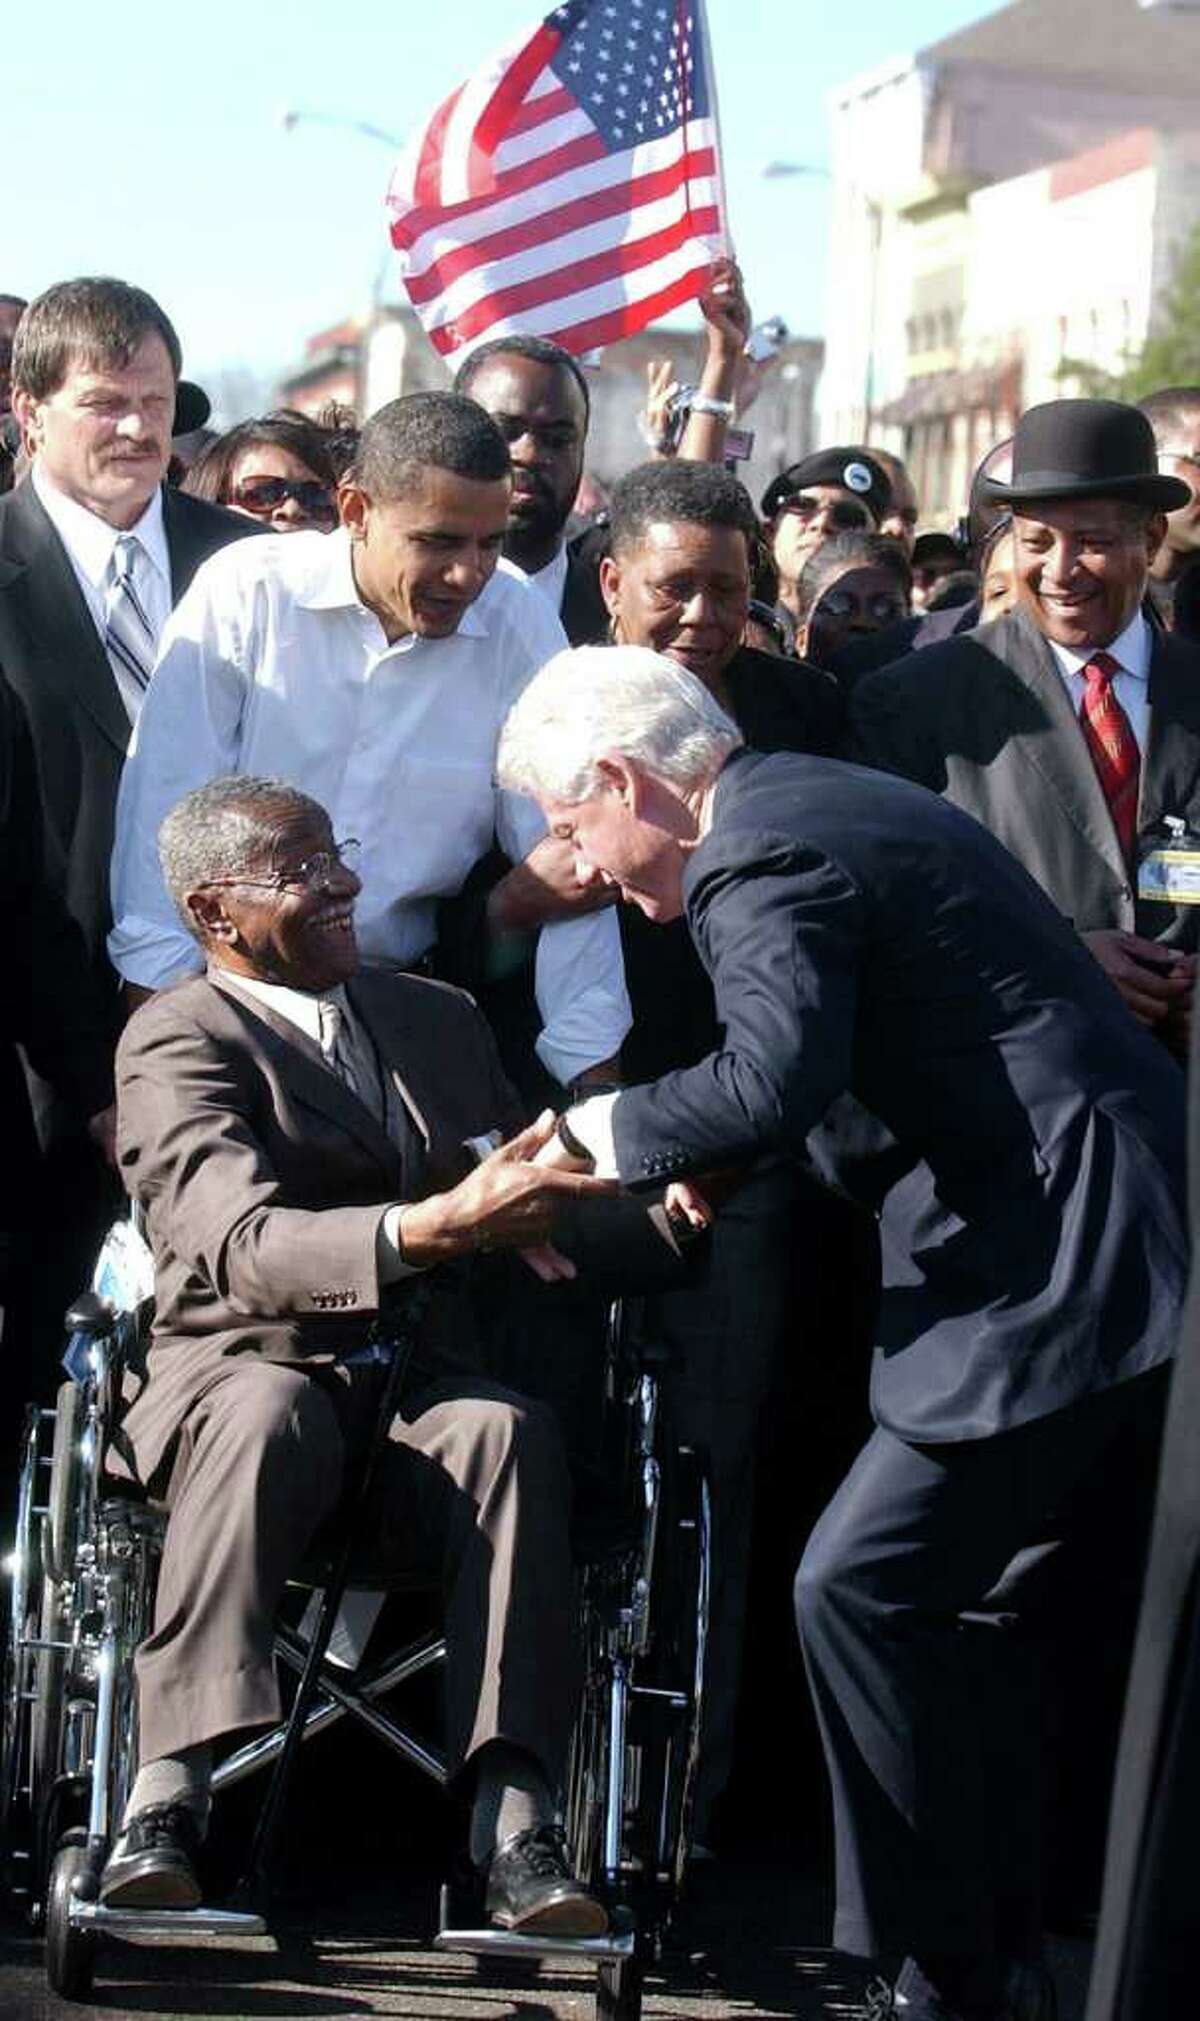 FILE - In a Sunday, March 4, 2007 file photo, Sen. Barack Obama, second from left, looks on as civil rights leader Fred Shuttlesworth, front left, greets former President Bill Clinton in Selma, Ala. The Rev. Fred Shuttlesworth, who was hailed by the Rev. Martin Luther King Jr. for his courage and energy, died Wednesday, Oct. 5, 2011 at the Birmingham, Ala. hospital. He was 89. (AP Photo/The Birmingham News, Linda Stelter) MAGS OUT; NO SALES